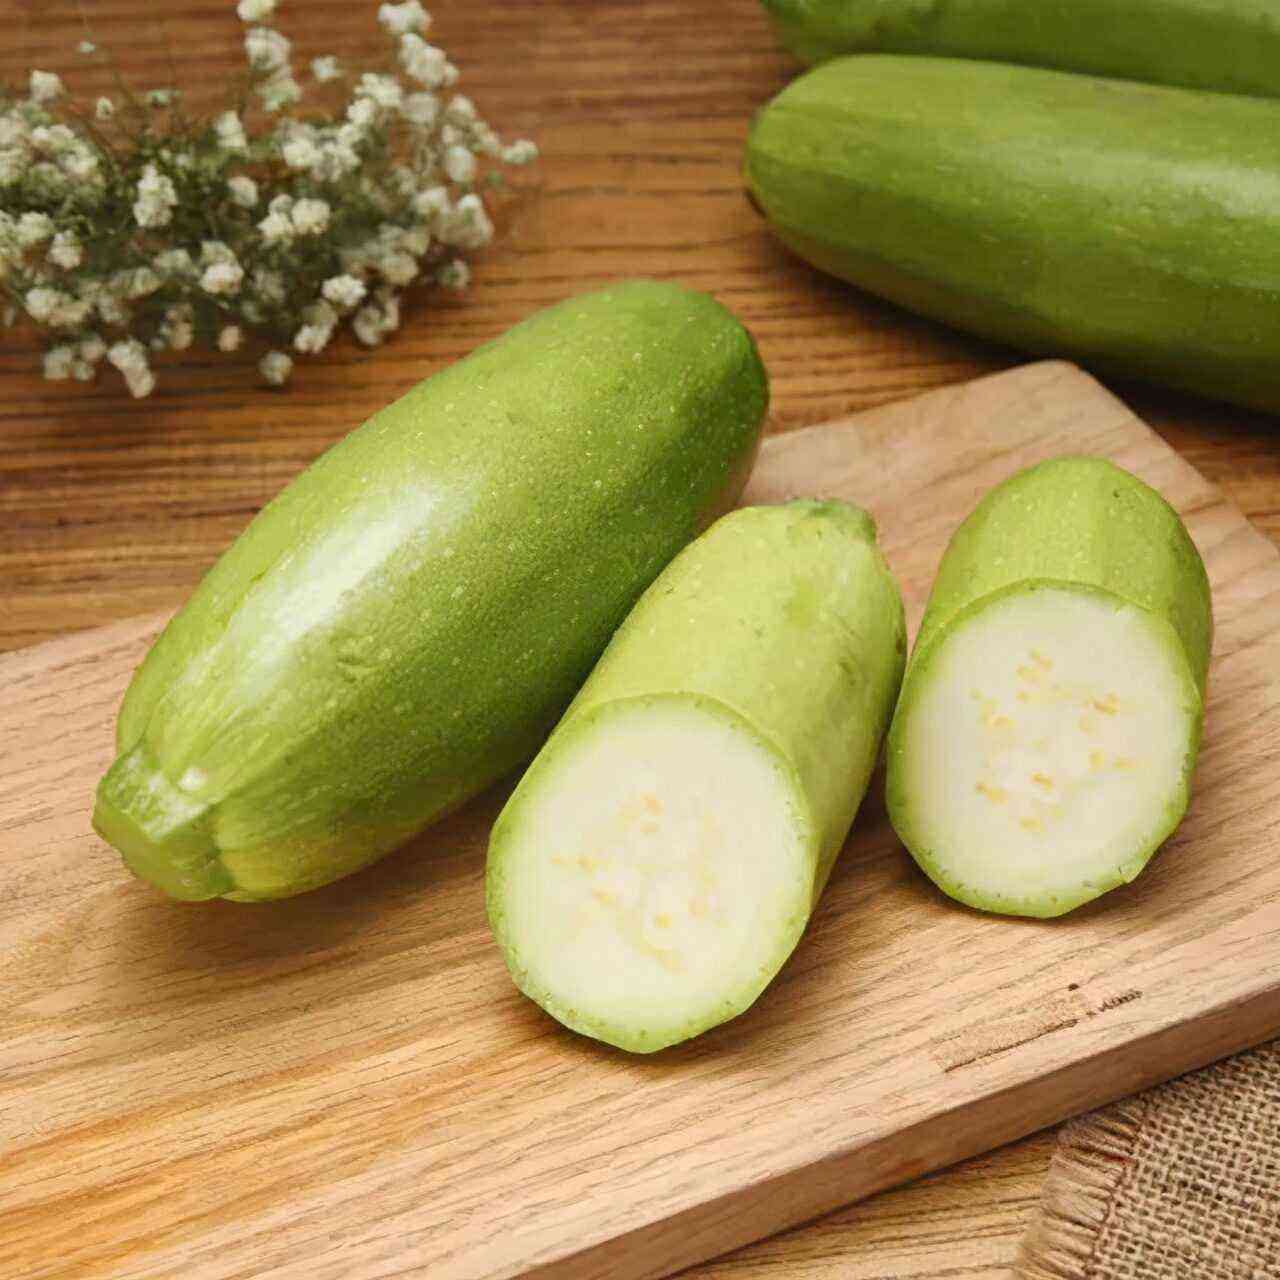 Why does the ovary not form on zucchini?